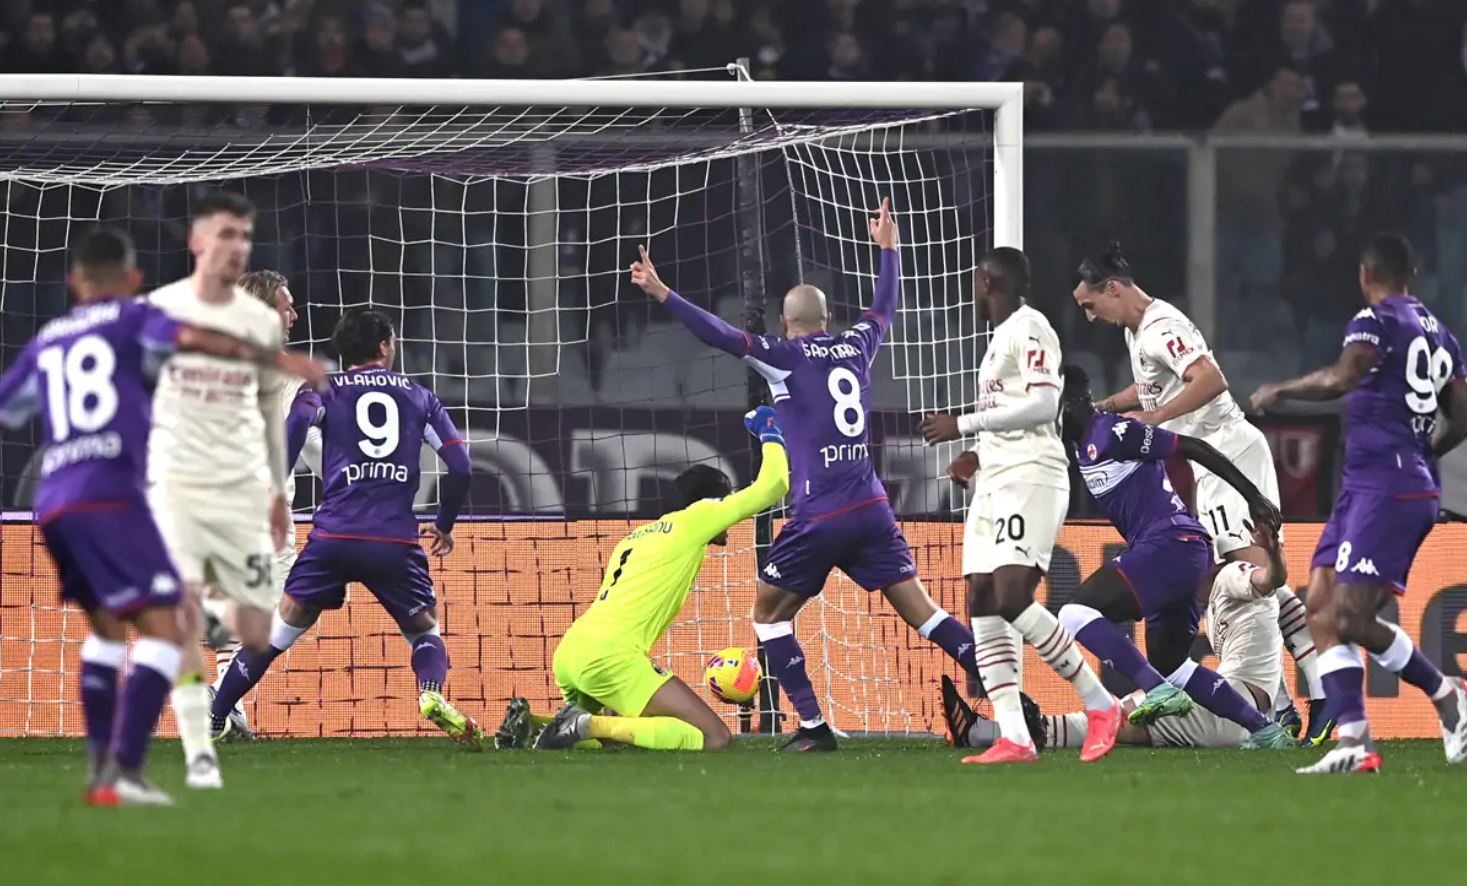 It was showtime at the Artemio Franchi Stadium as Fiorentina inflicted Milan their first Serie A loss of the season. The Viola prevailed 4-3